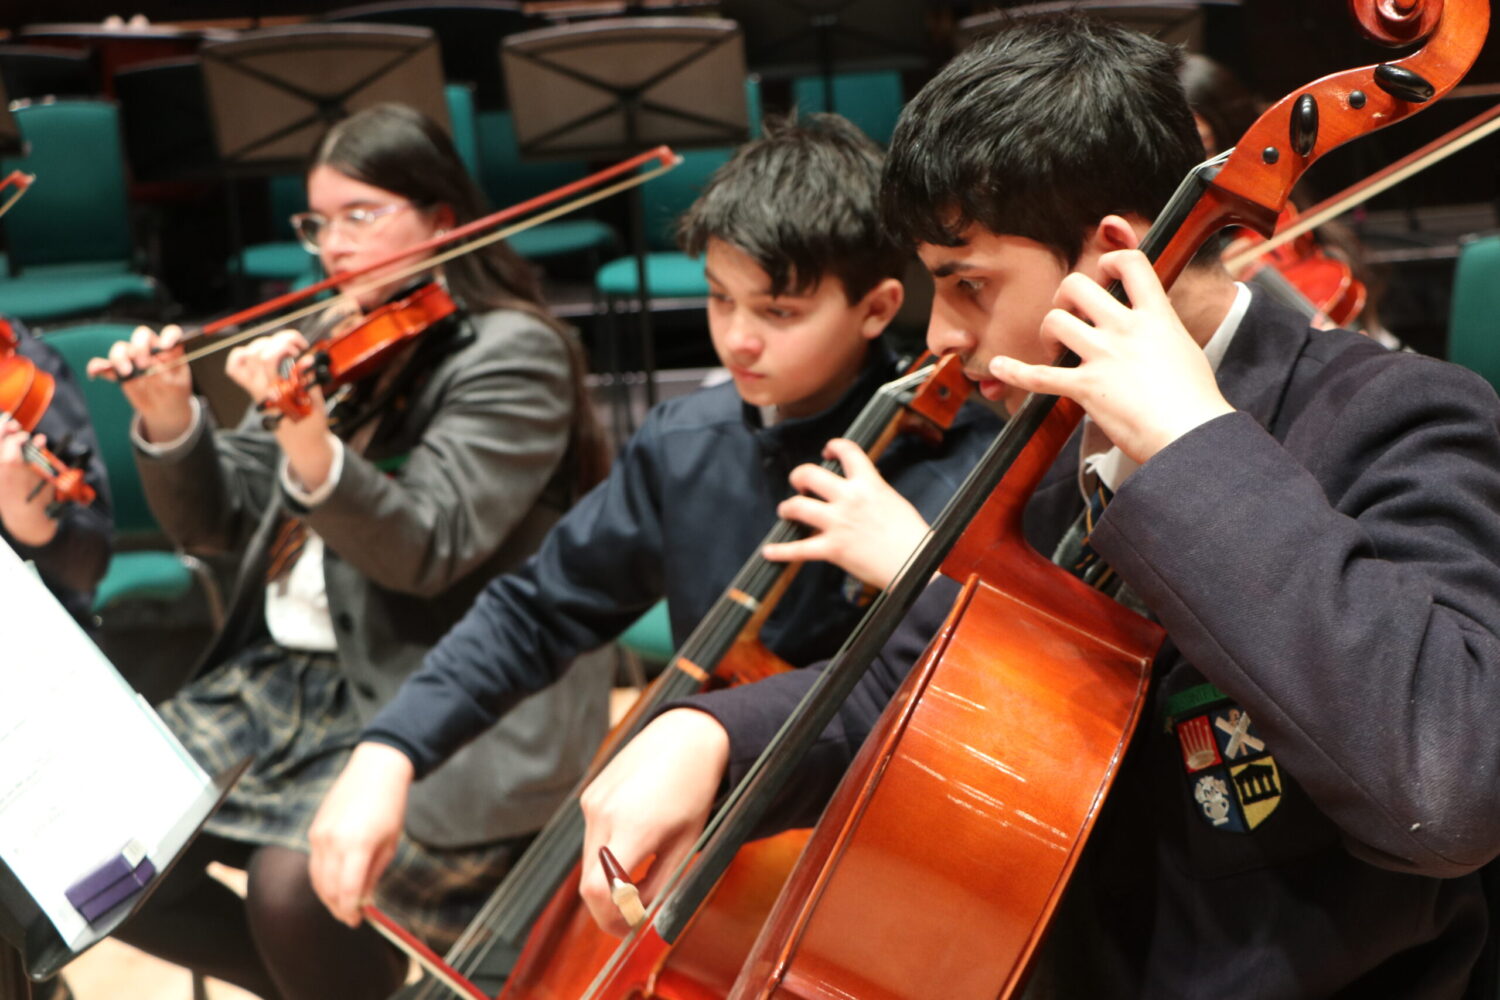 JUNIOR AND SENIOR STRINGS . Junior pupils string orchestra playing Cello and Violin, while reading music notes.